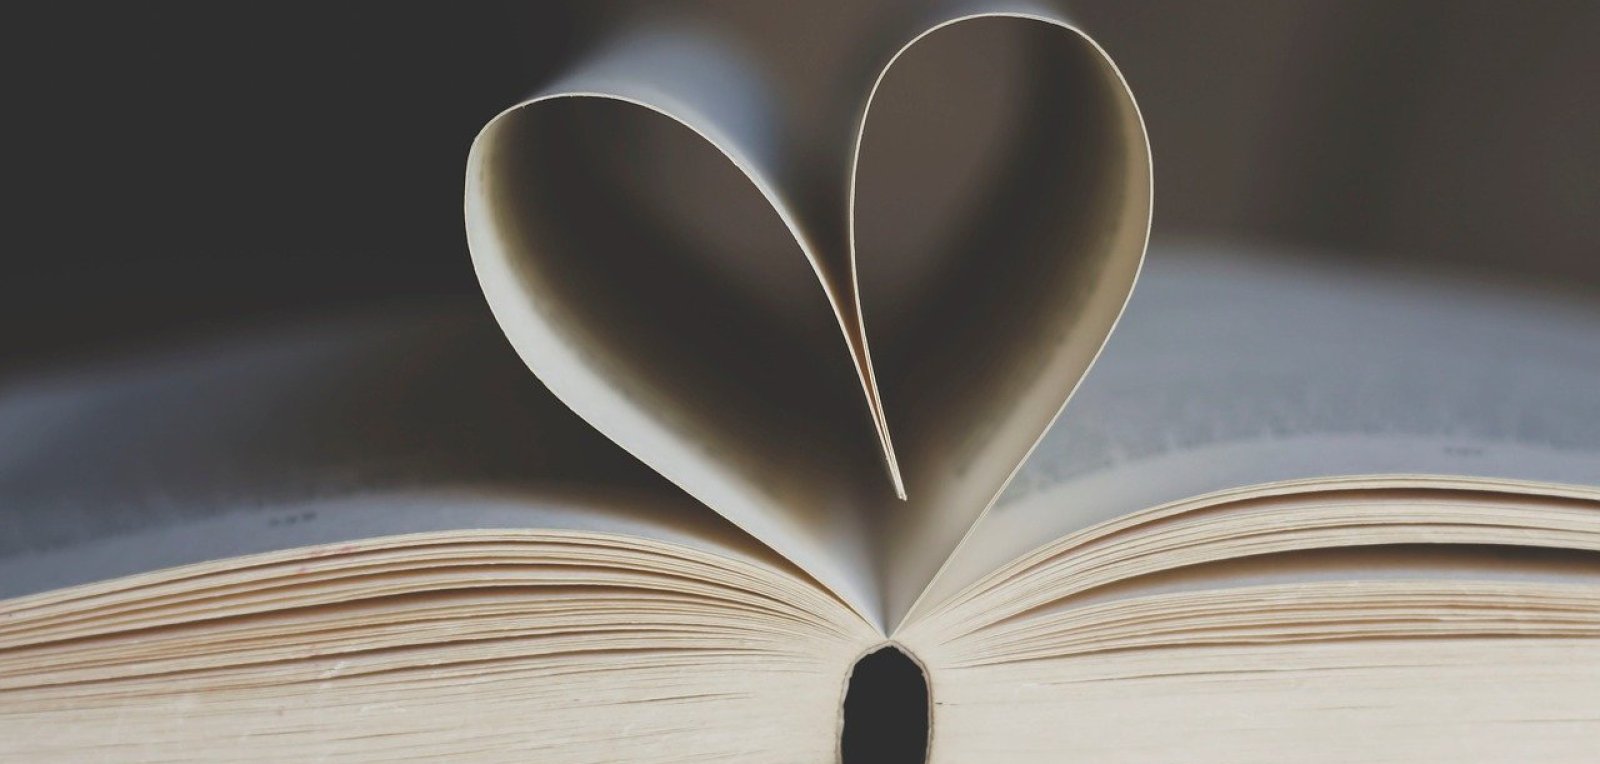 Pages of a book folded into a heart